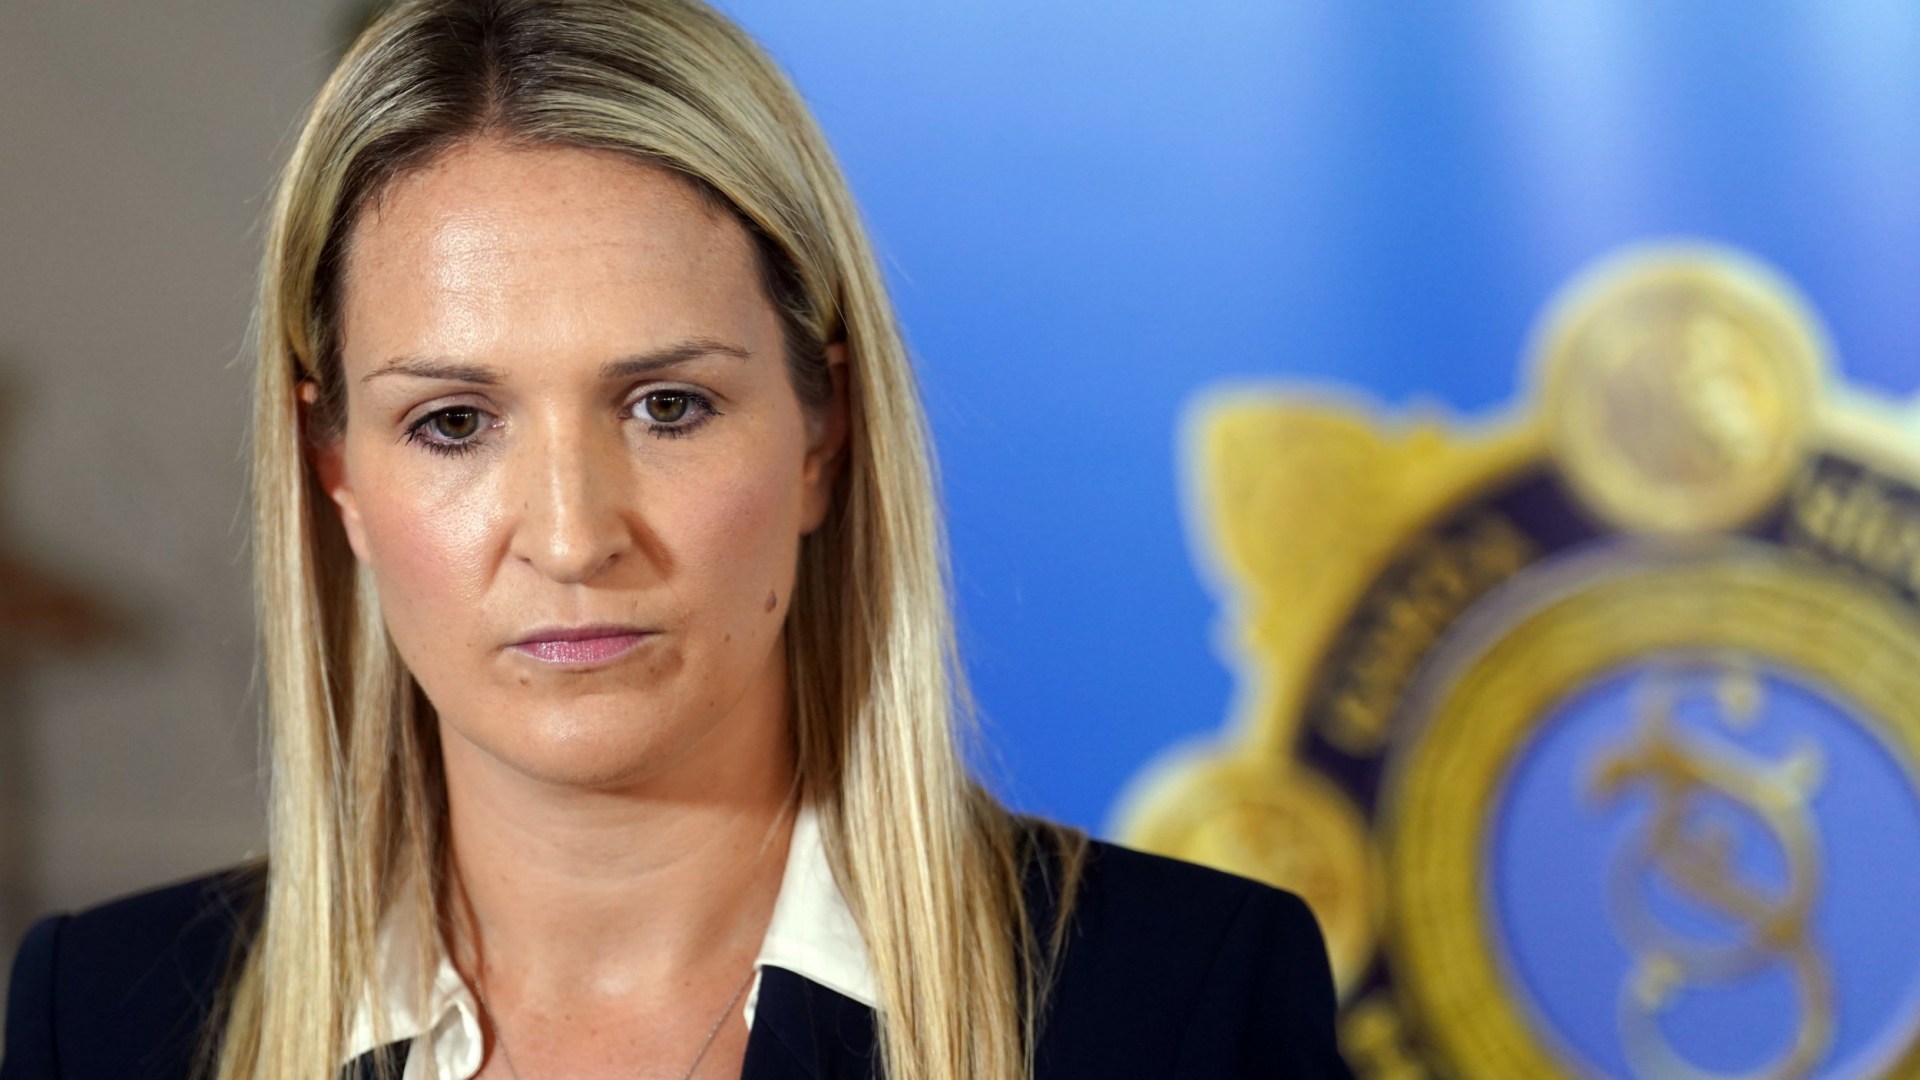 Helen McEntee’s family evacuated from home over bomb threat as Harris issues ‘full measure of law’ punishment vow [Video]